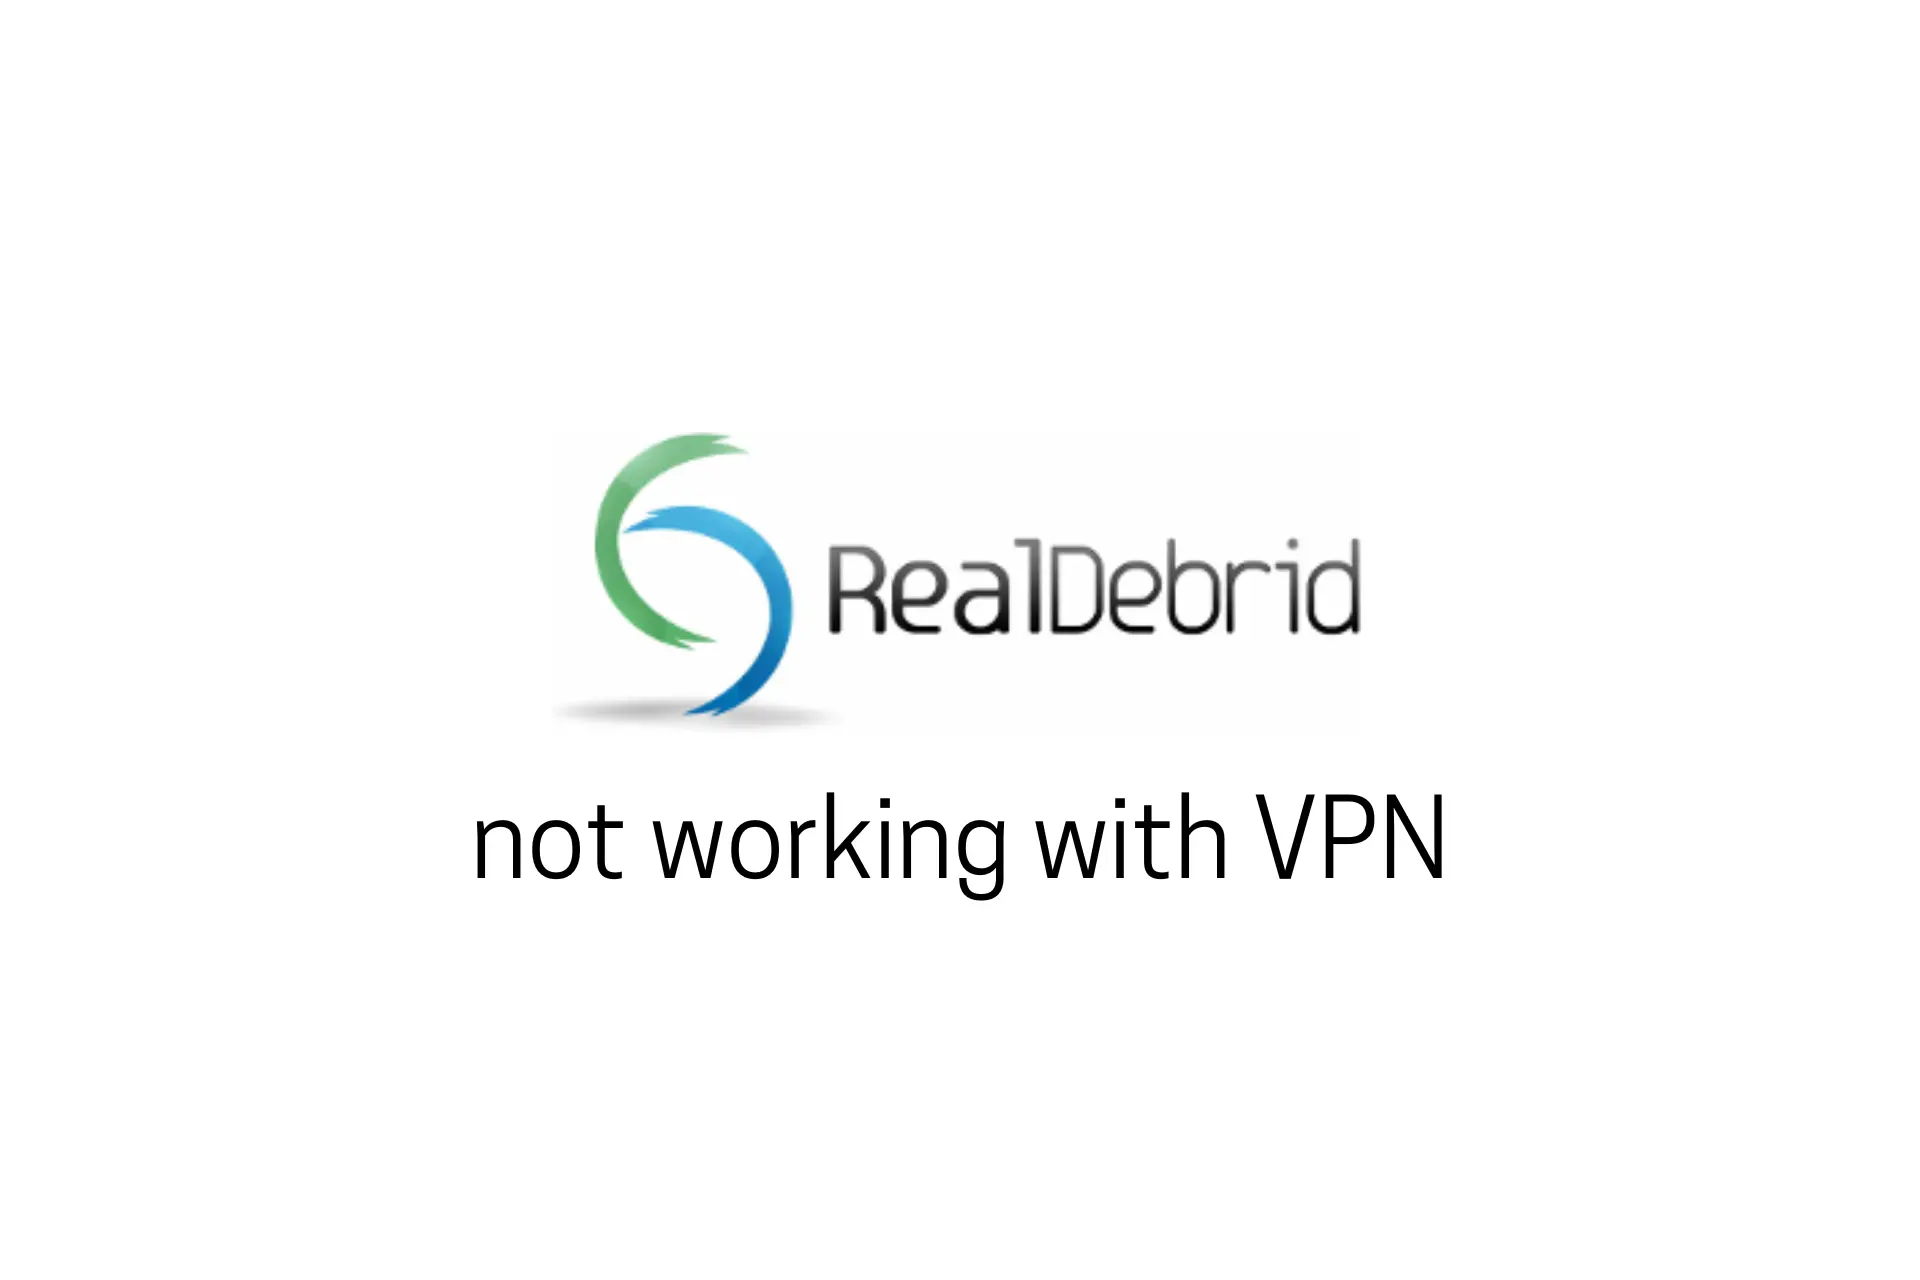 real debrid not working with VPN